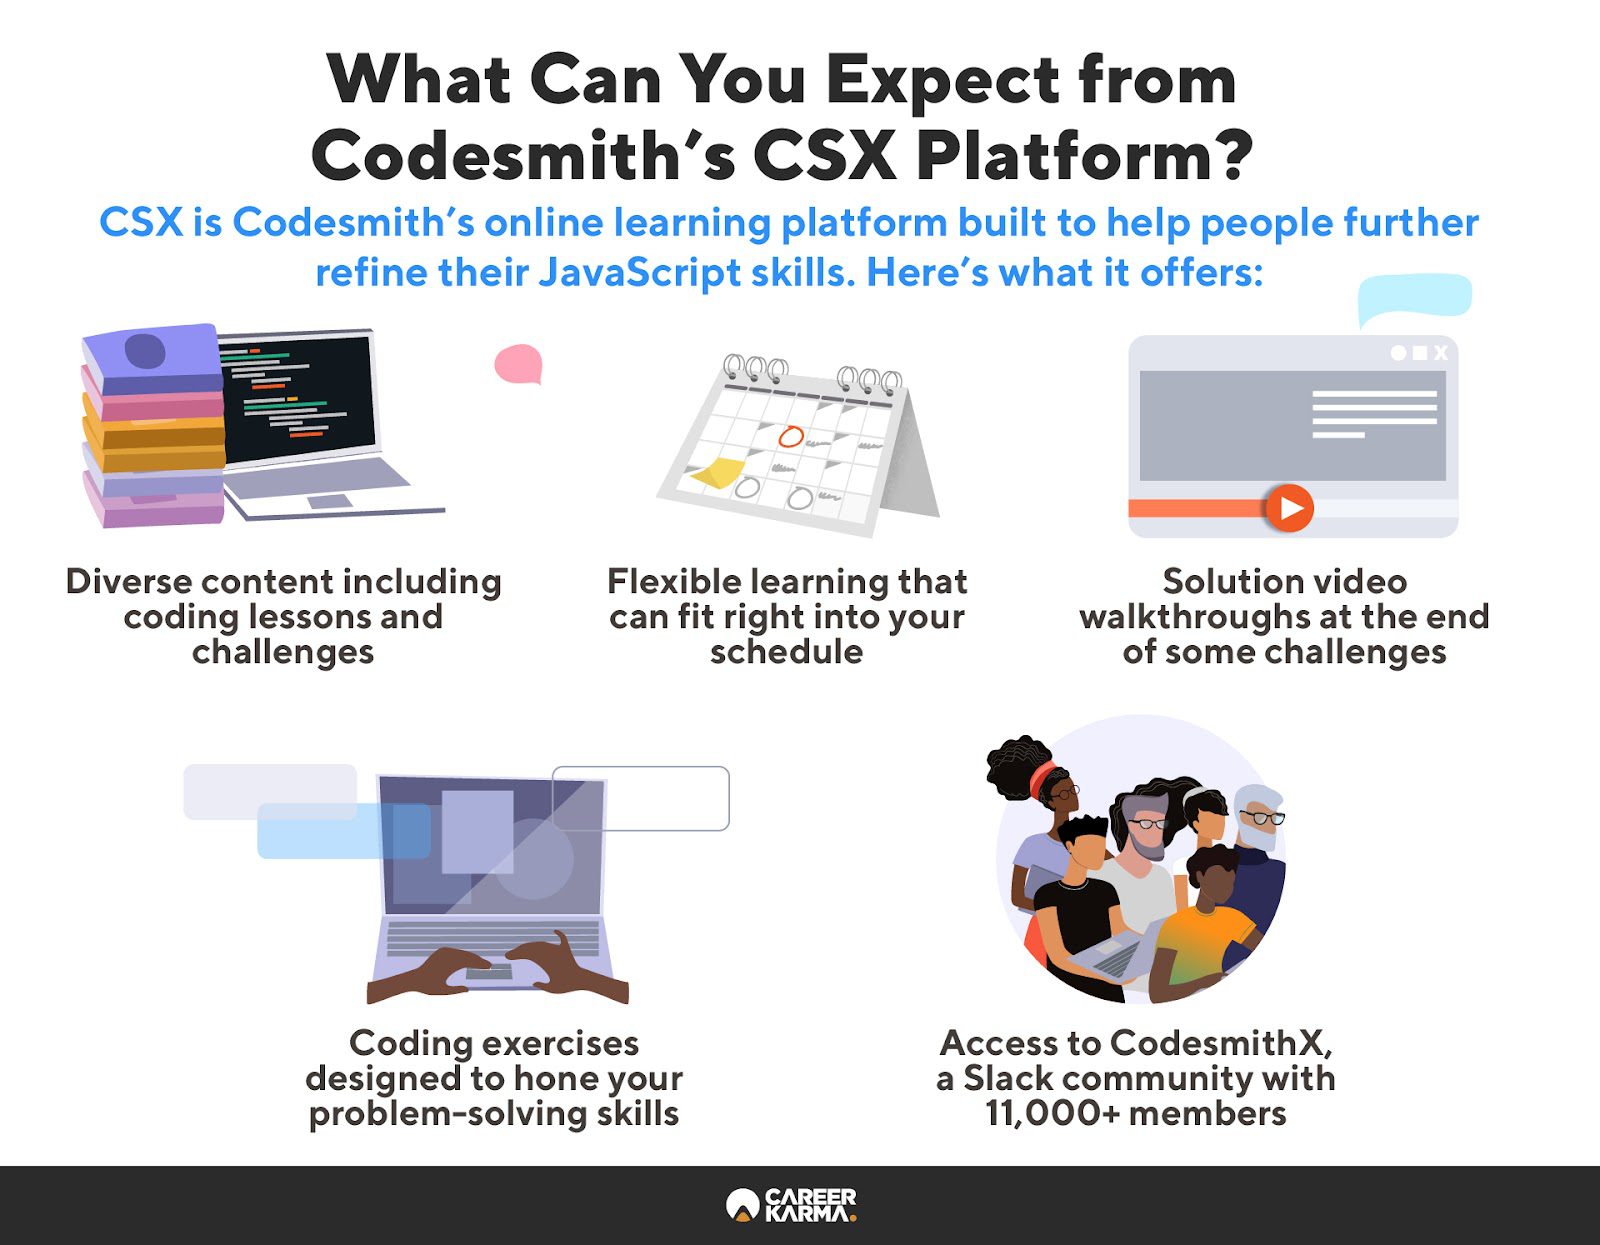 An infographic highlighting the key features of Codesmith’s CSX platform